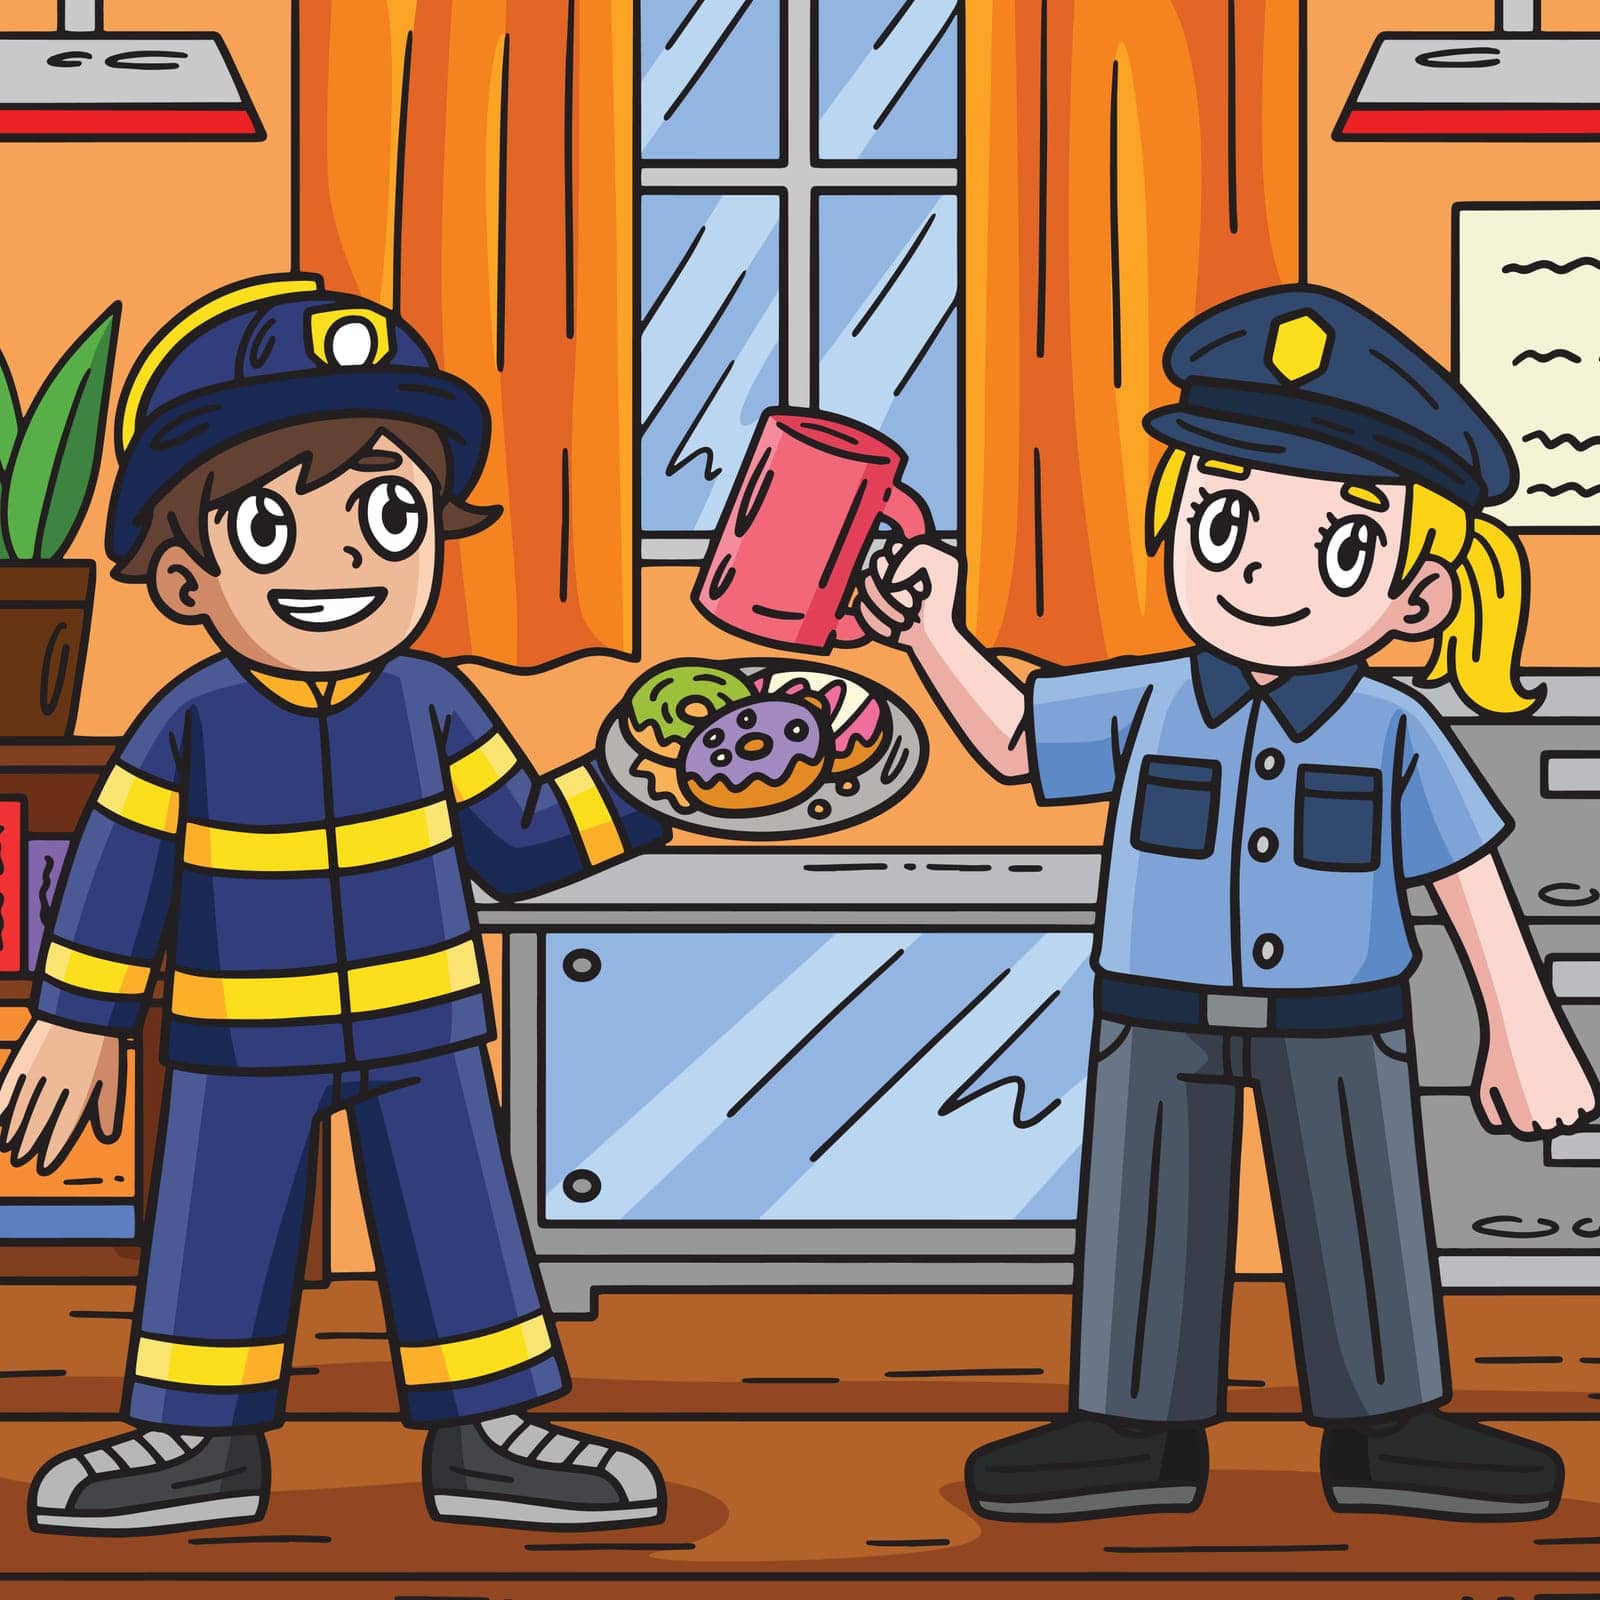 This cartoon clipart shows a Firefighter and Policewoman illustration.